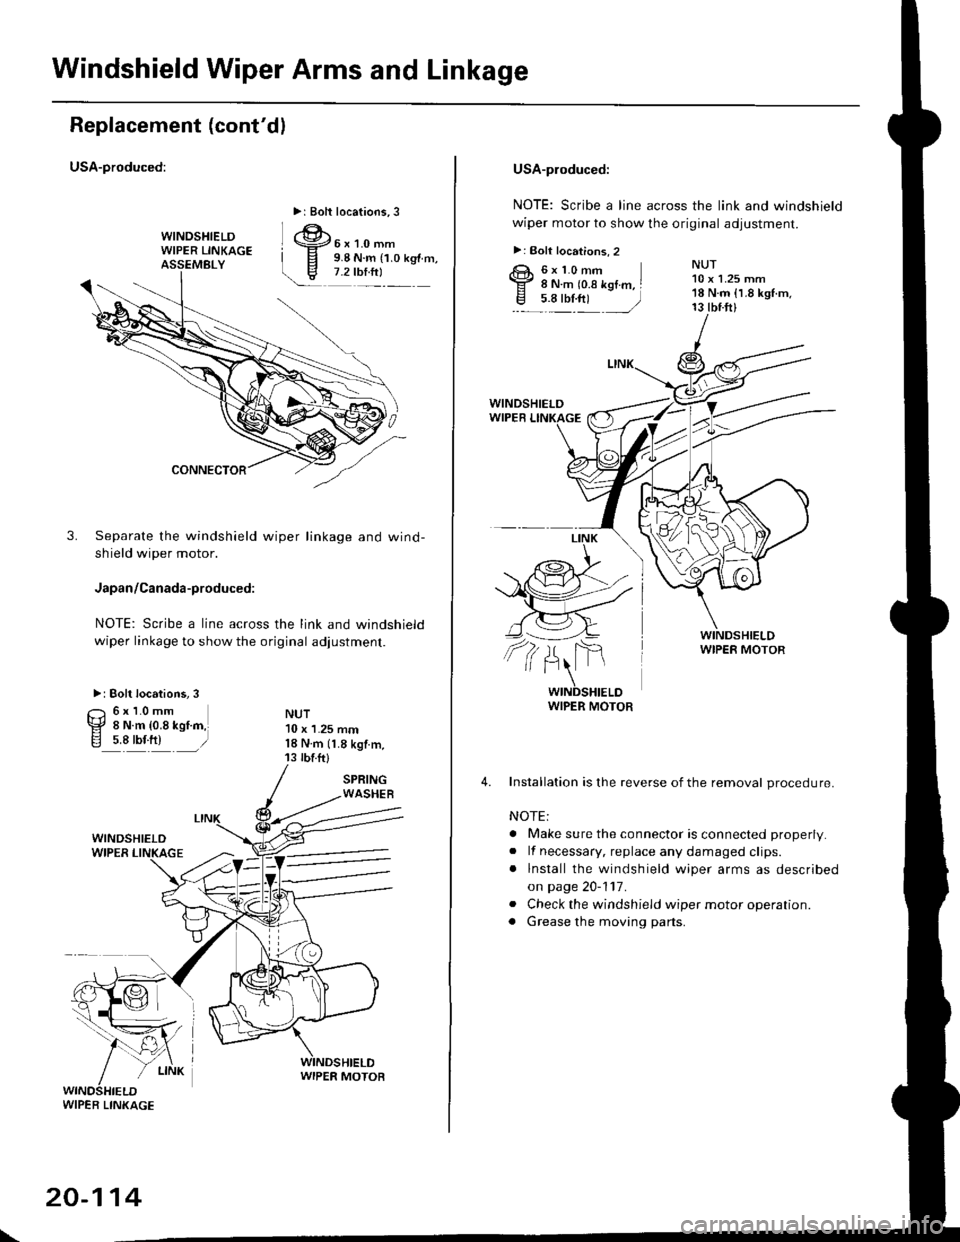 HONDA CIVIC 1997 6.G Workshop Manual Windshield Wiper Arms and Linkage
Replacement (contdl
USA-produced:
3. Separate the windshield wiper linkage and wind-
shield wiper motor.
Japan/Canada-produced:
NOTE: Scribe a line across the link a